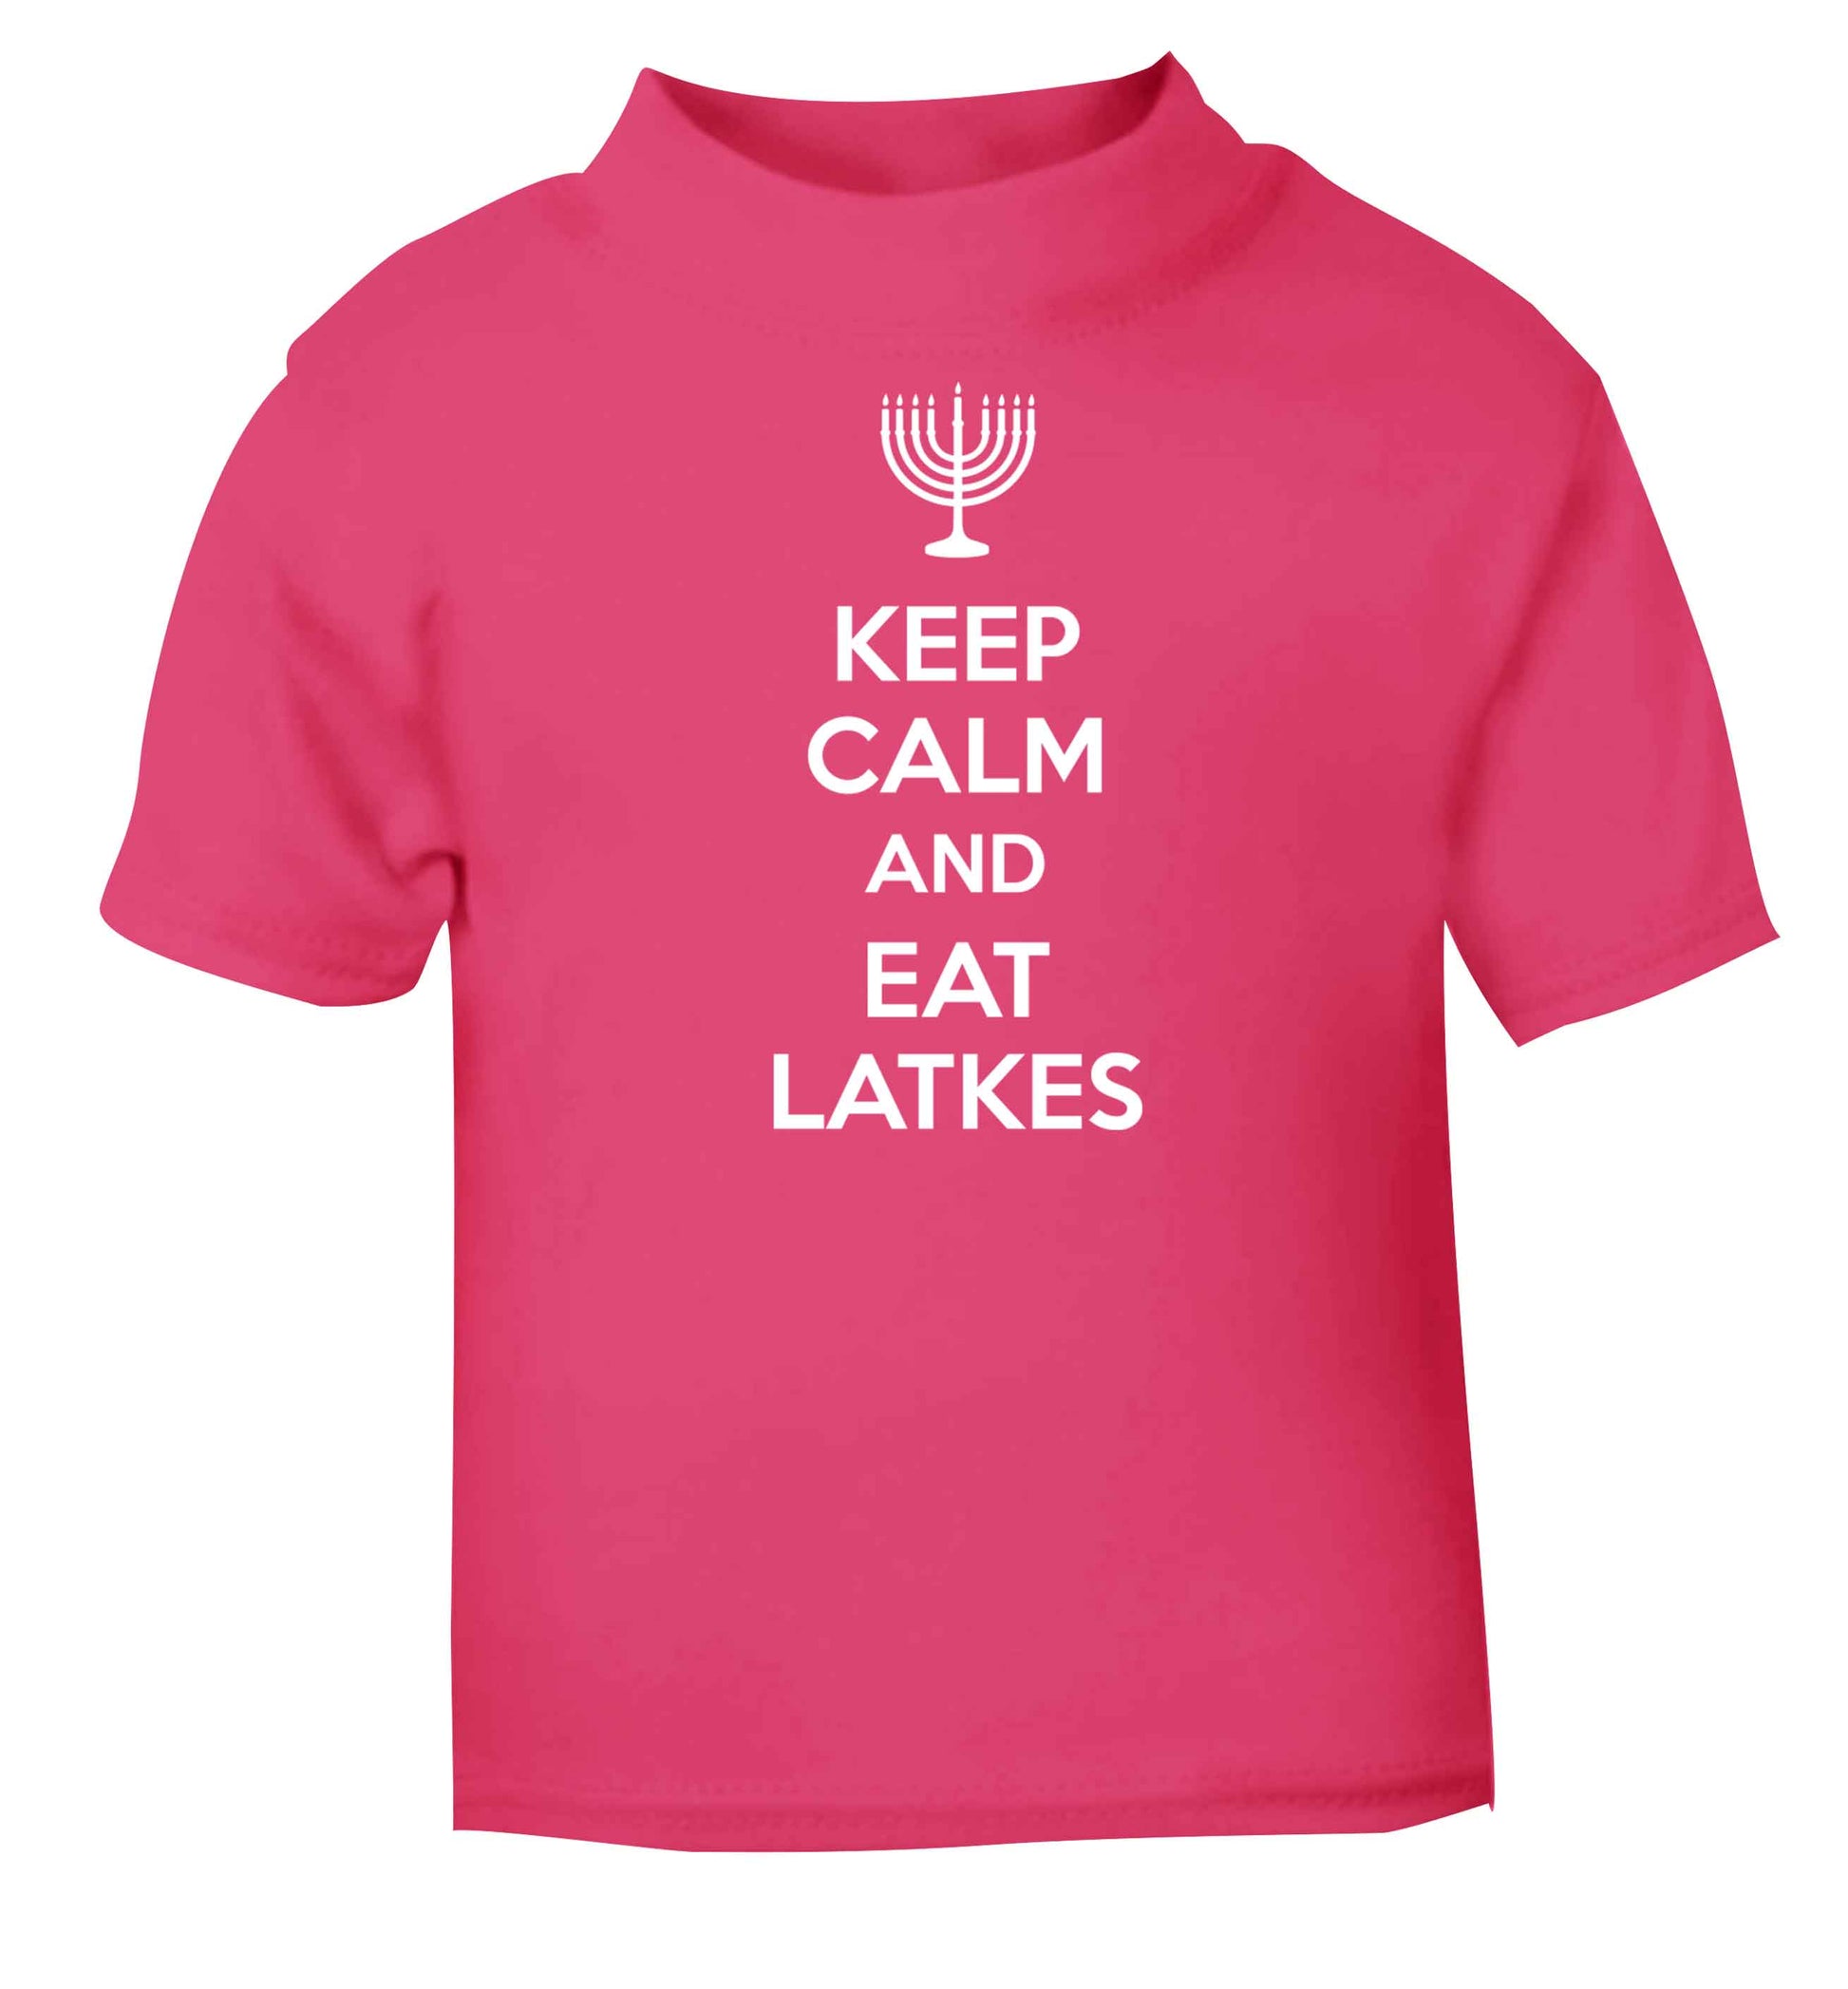 Keep calm and eat latkes pink baby toddler Tshirt 2 Years